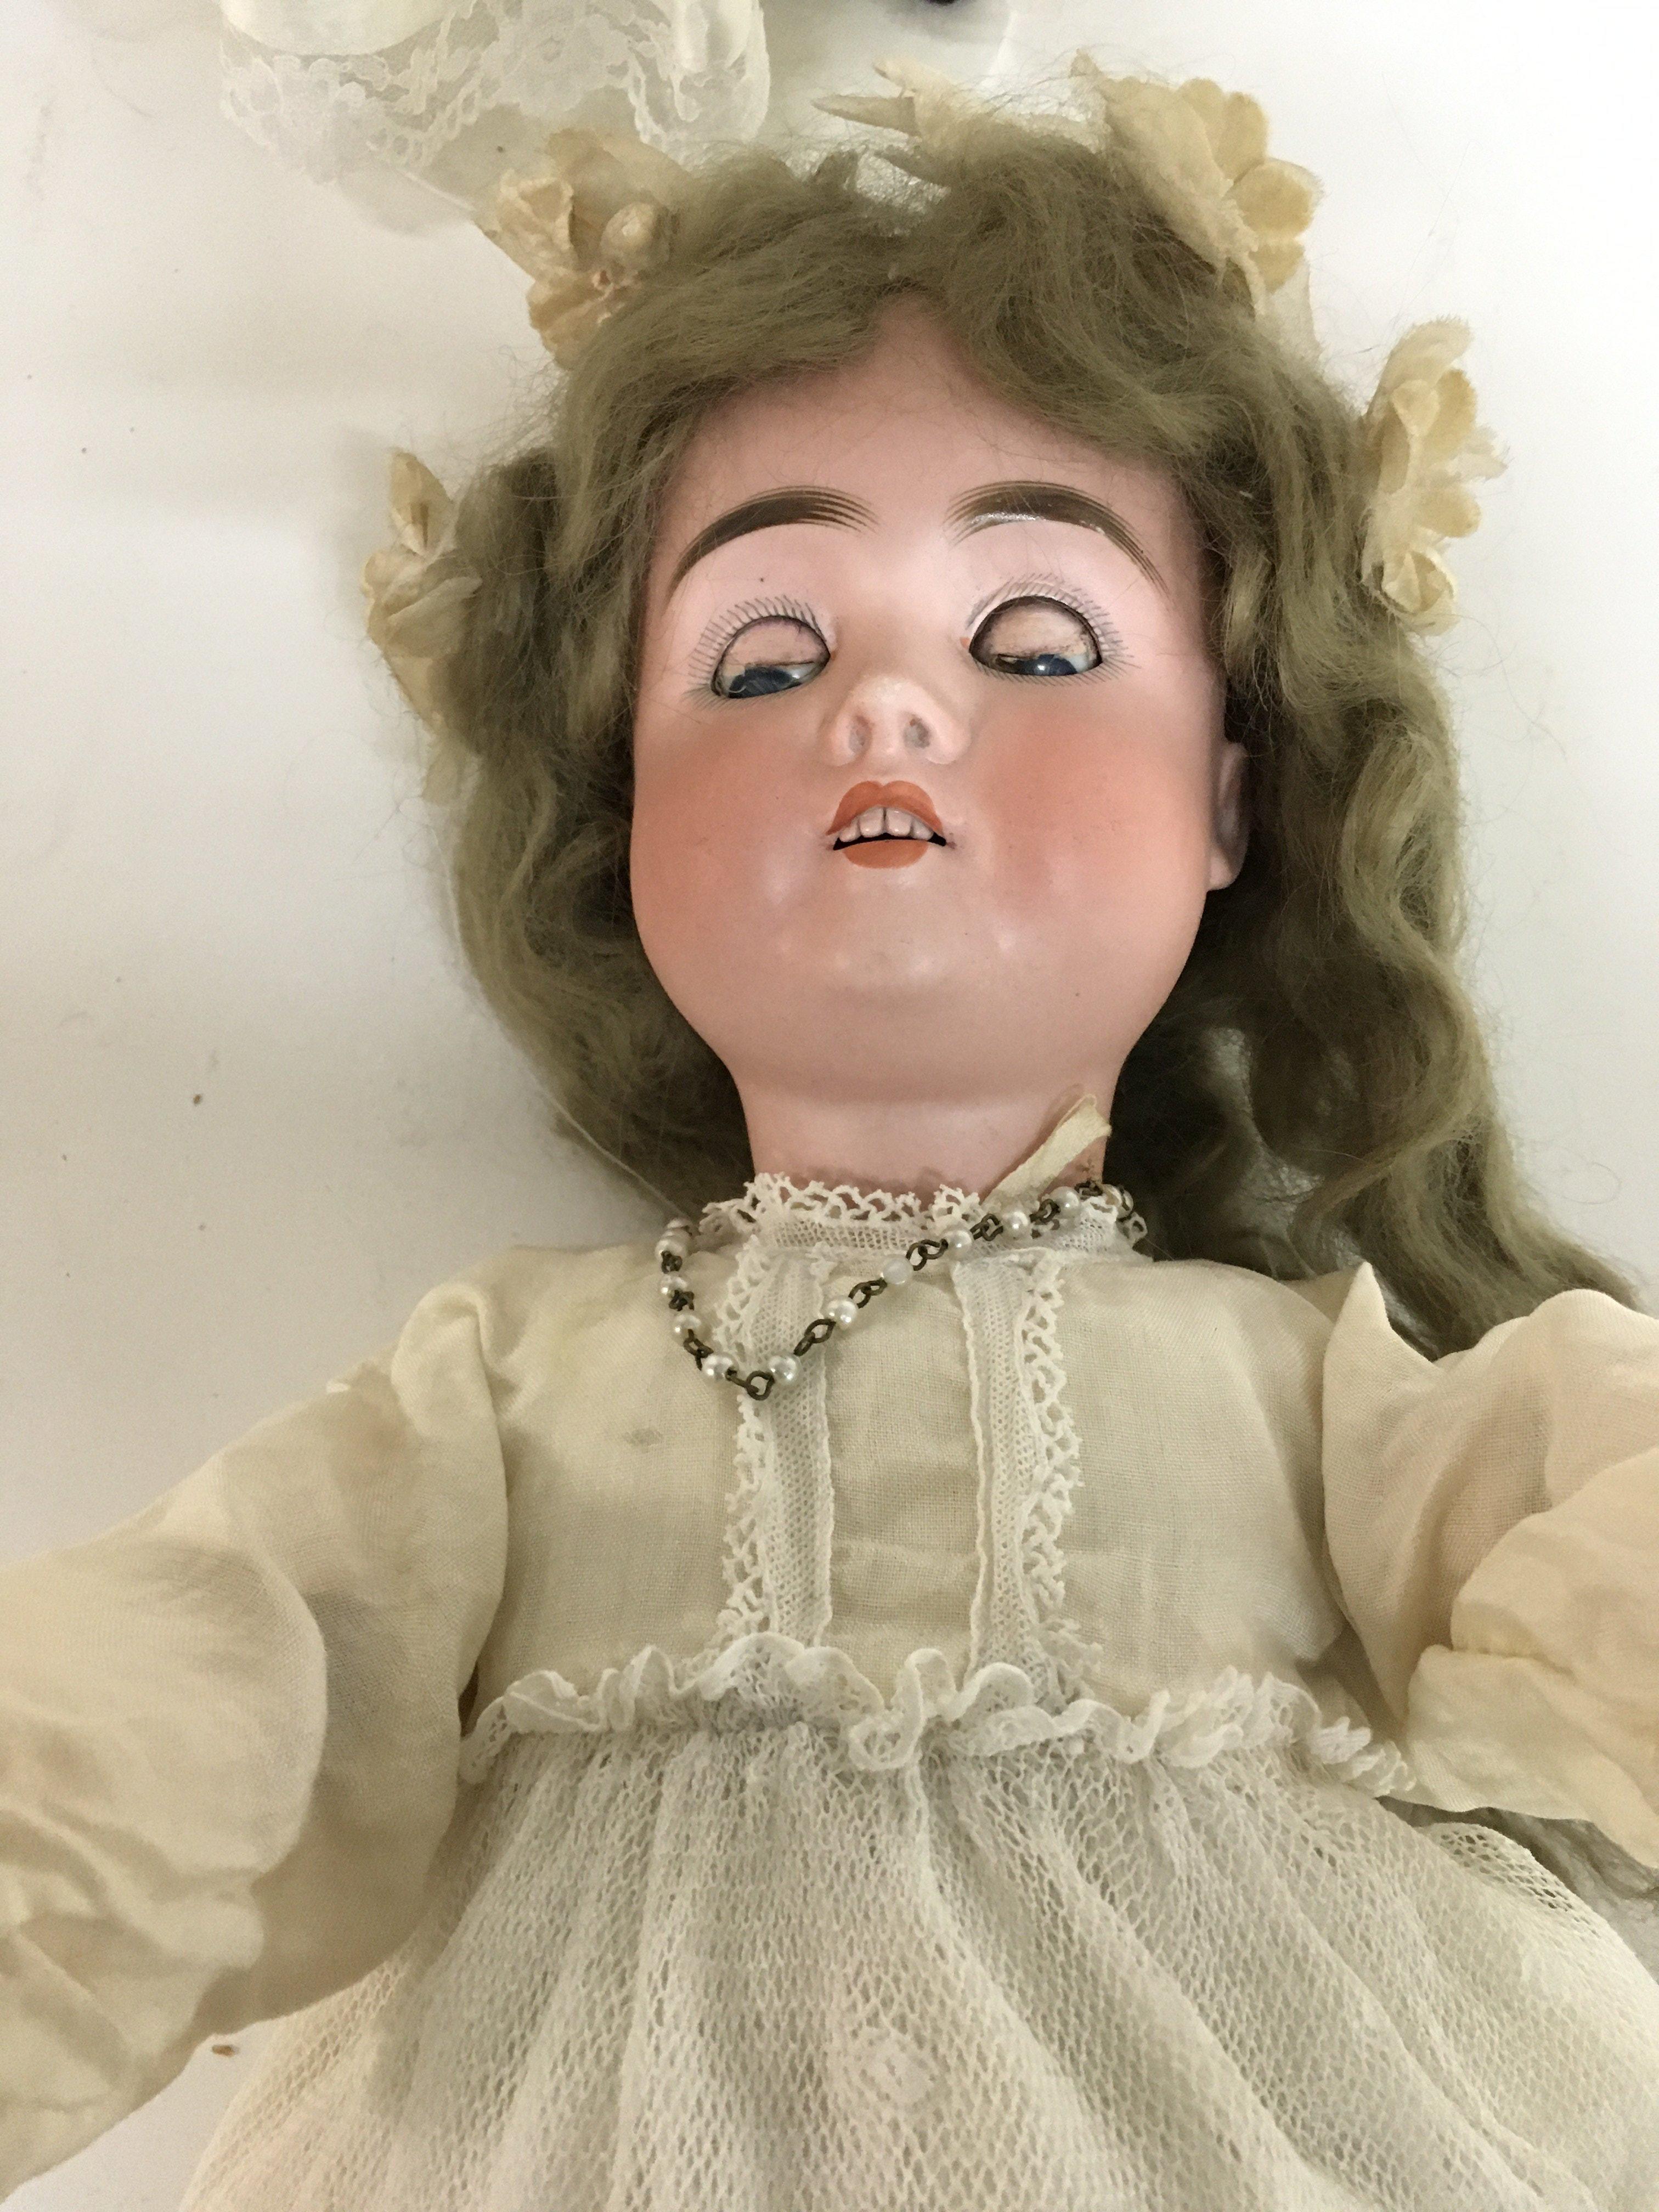 A M German doll marked 370 in Edwardian style dres - Image 4 of 6